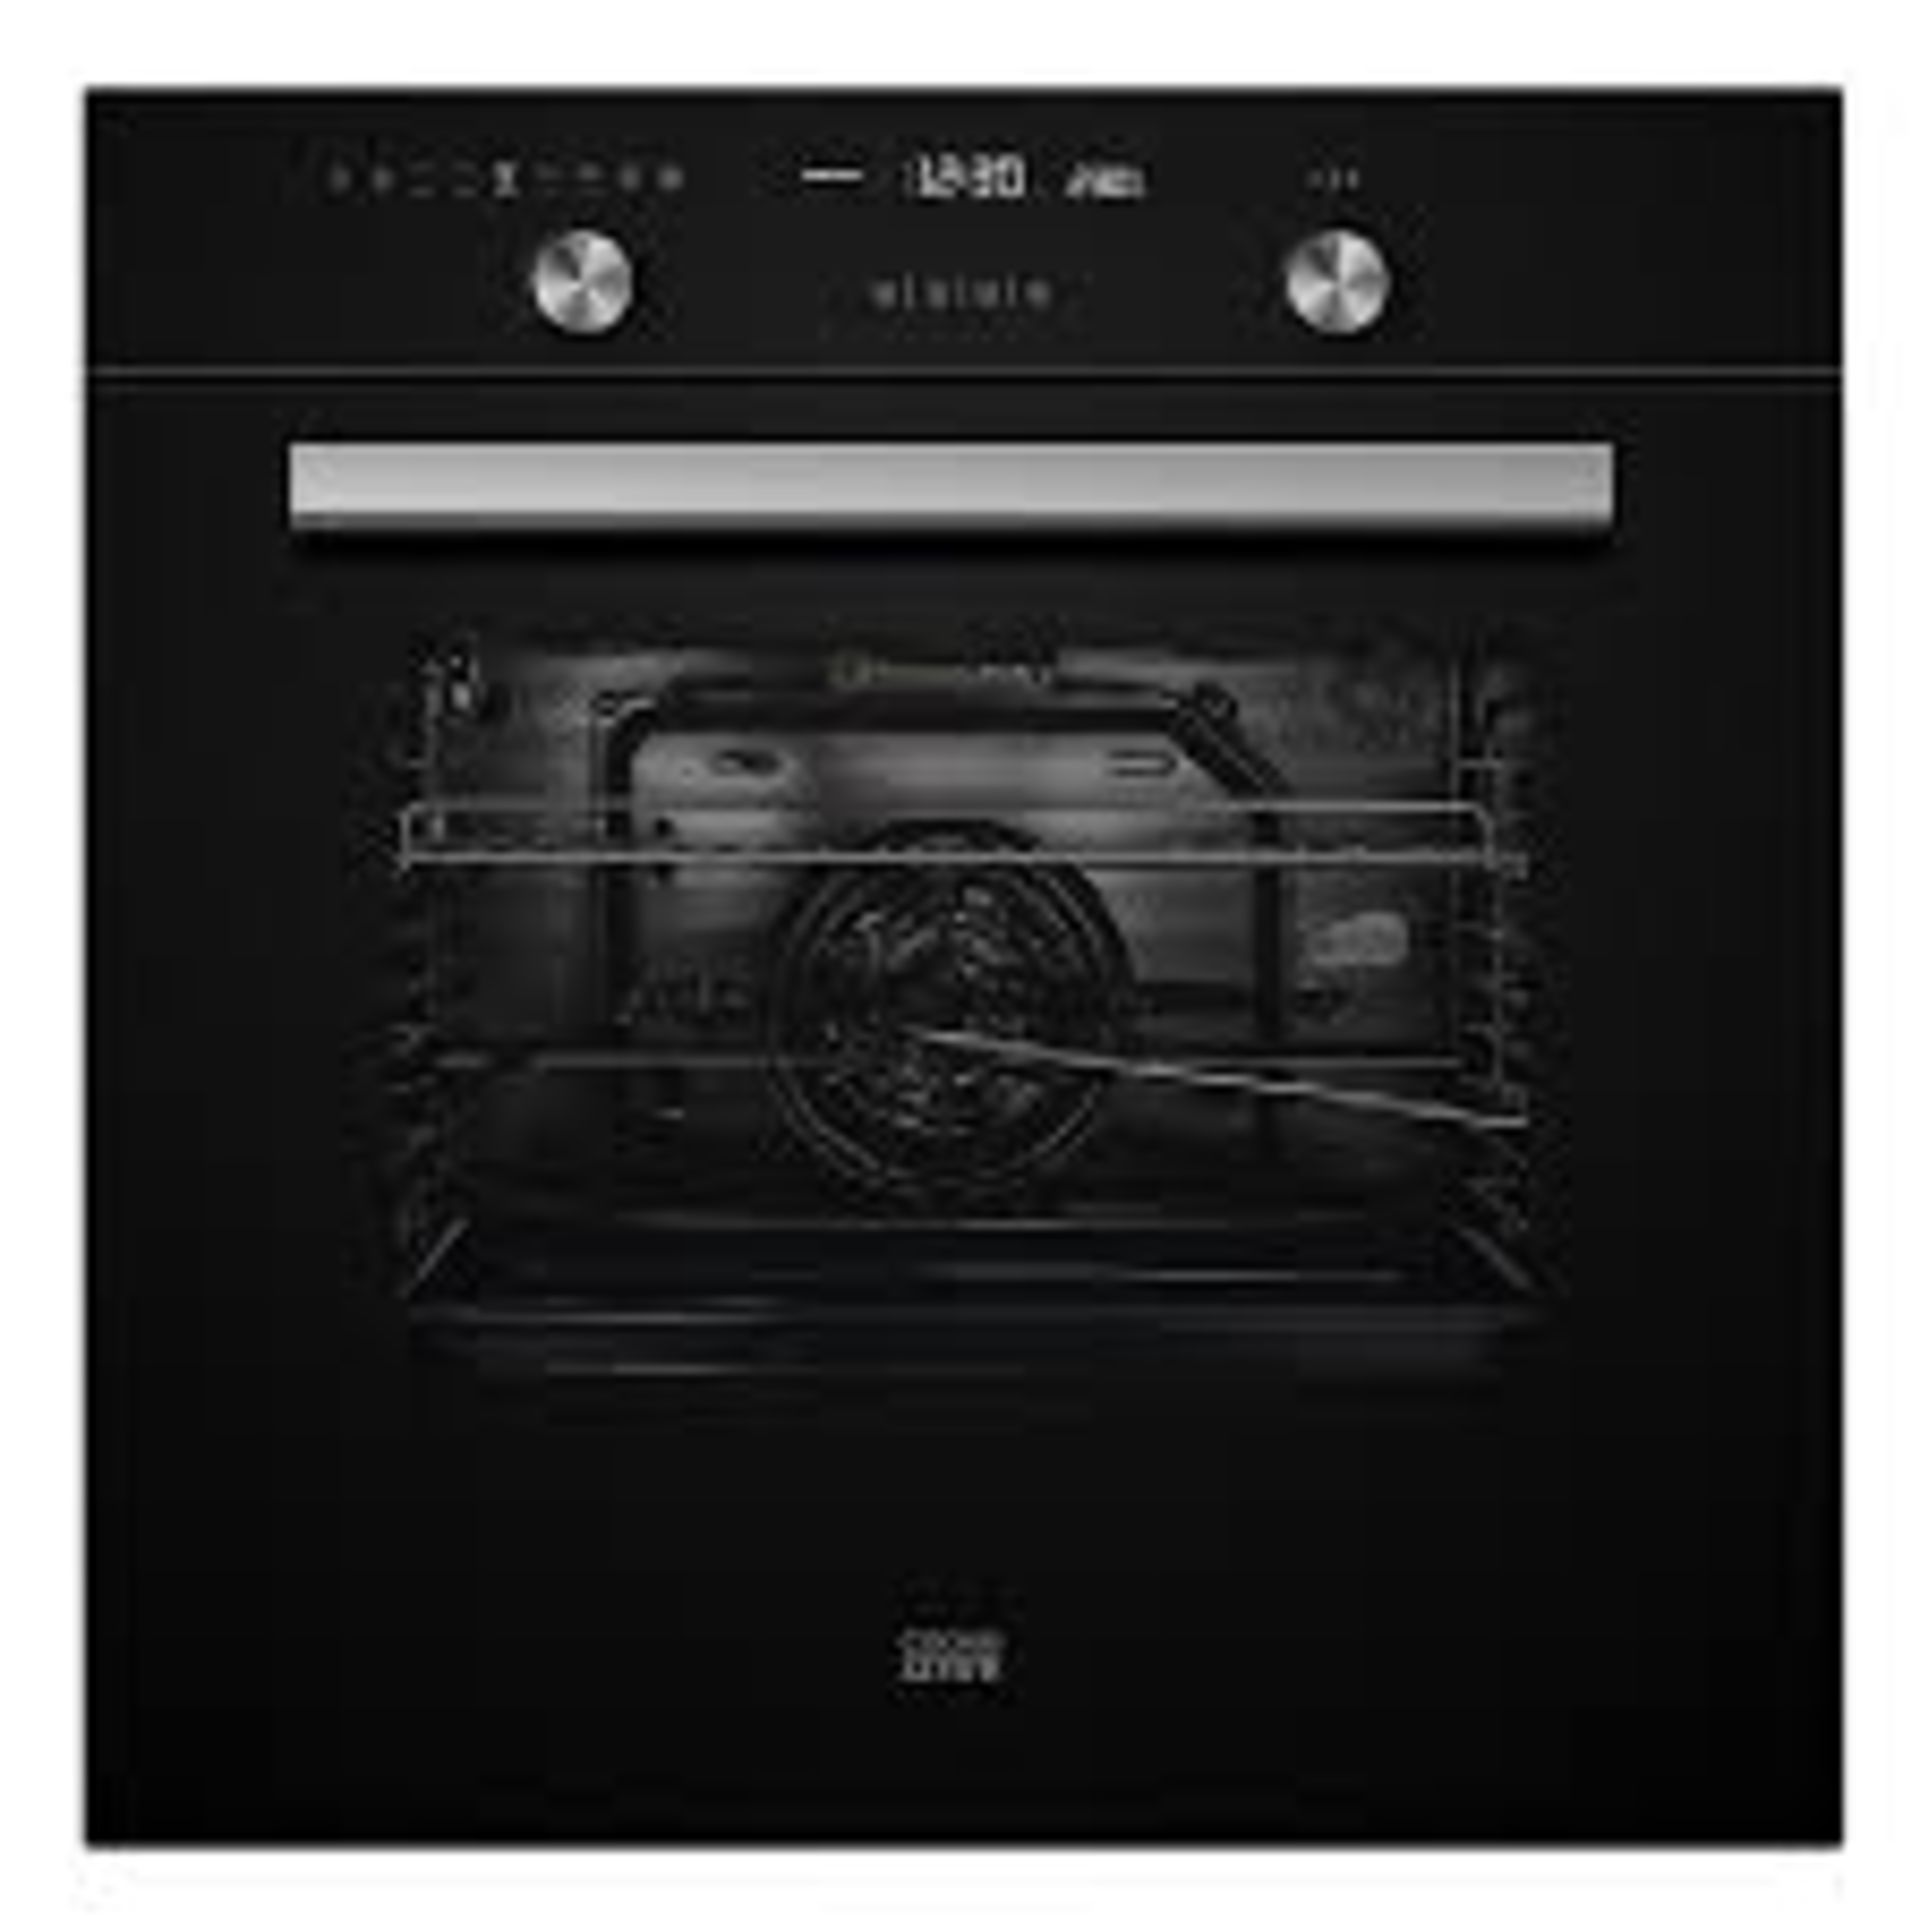 Cooke & Lewis CLMFBLa Built-in Single Multifunction Oven - Black. - R9BW. This multifunctional